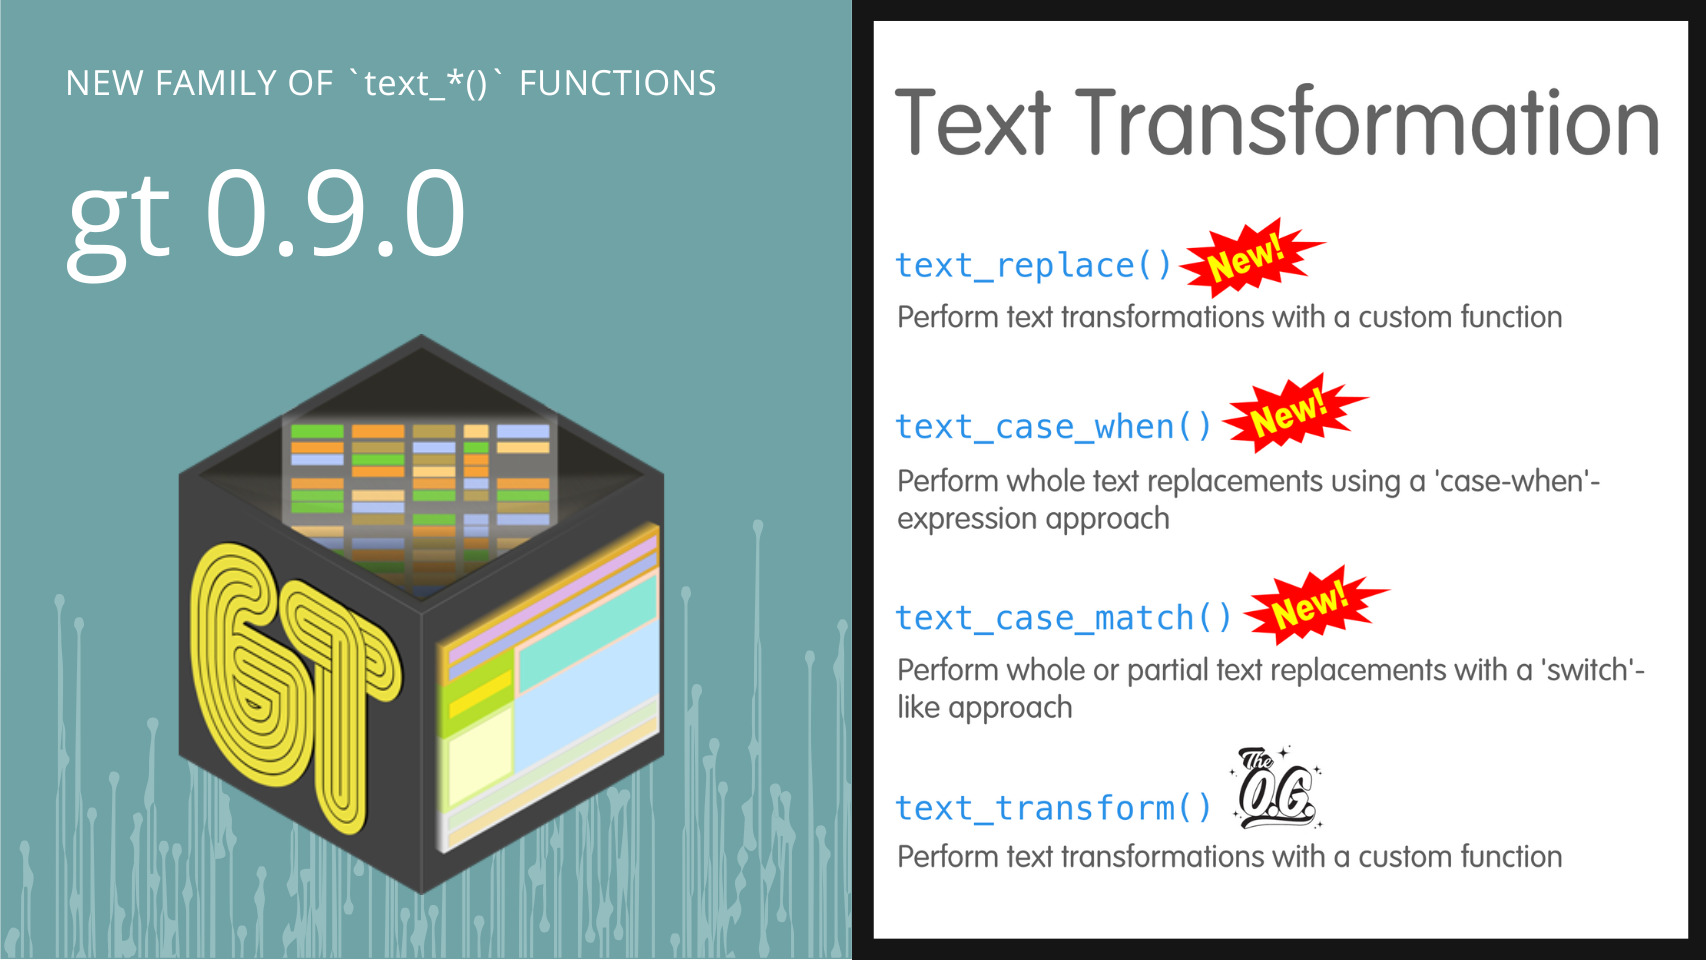 New family of text functions in gt 0.9.0. The gt hex sticker and a list of the new functions in the text family.